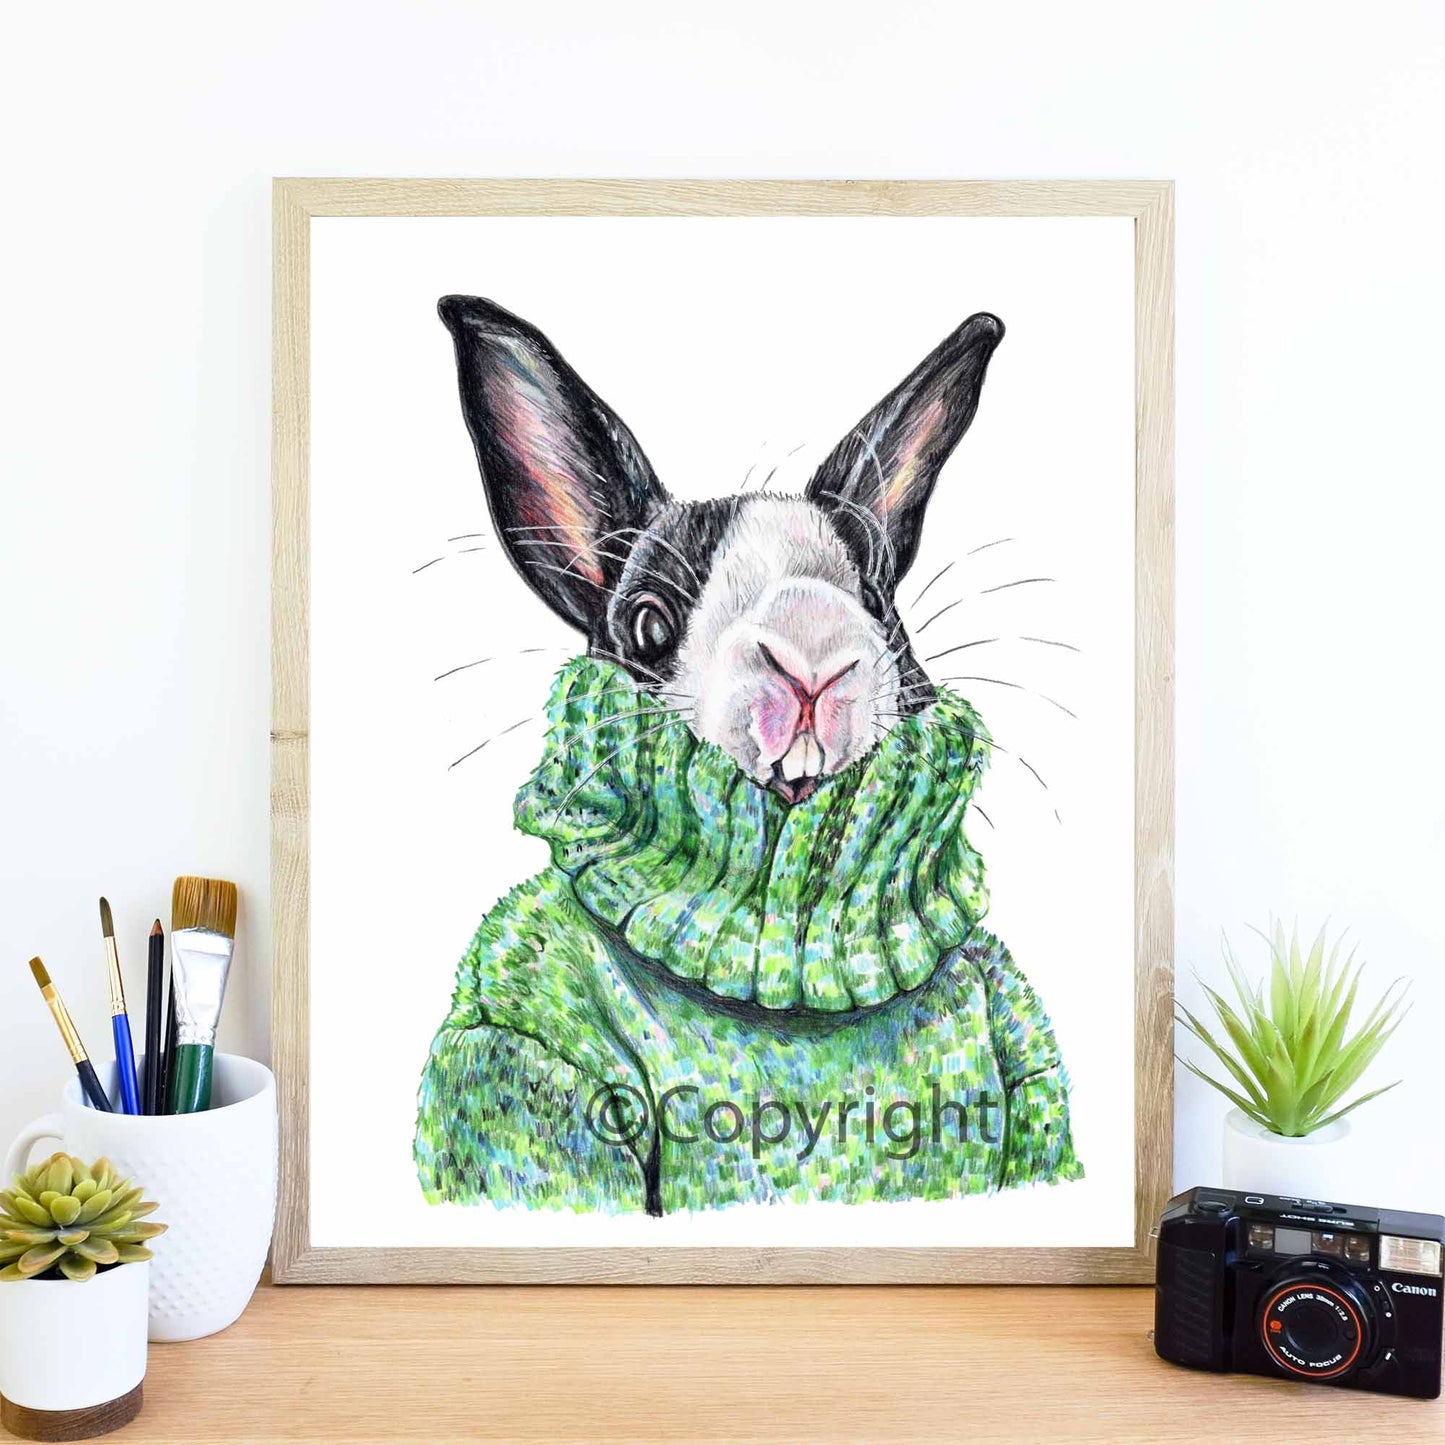 Coloured pencil drawing of a black and white bunny rabbit wearing a large green sweater. Art by Deidre Wicks